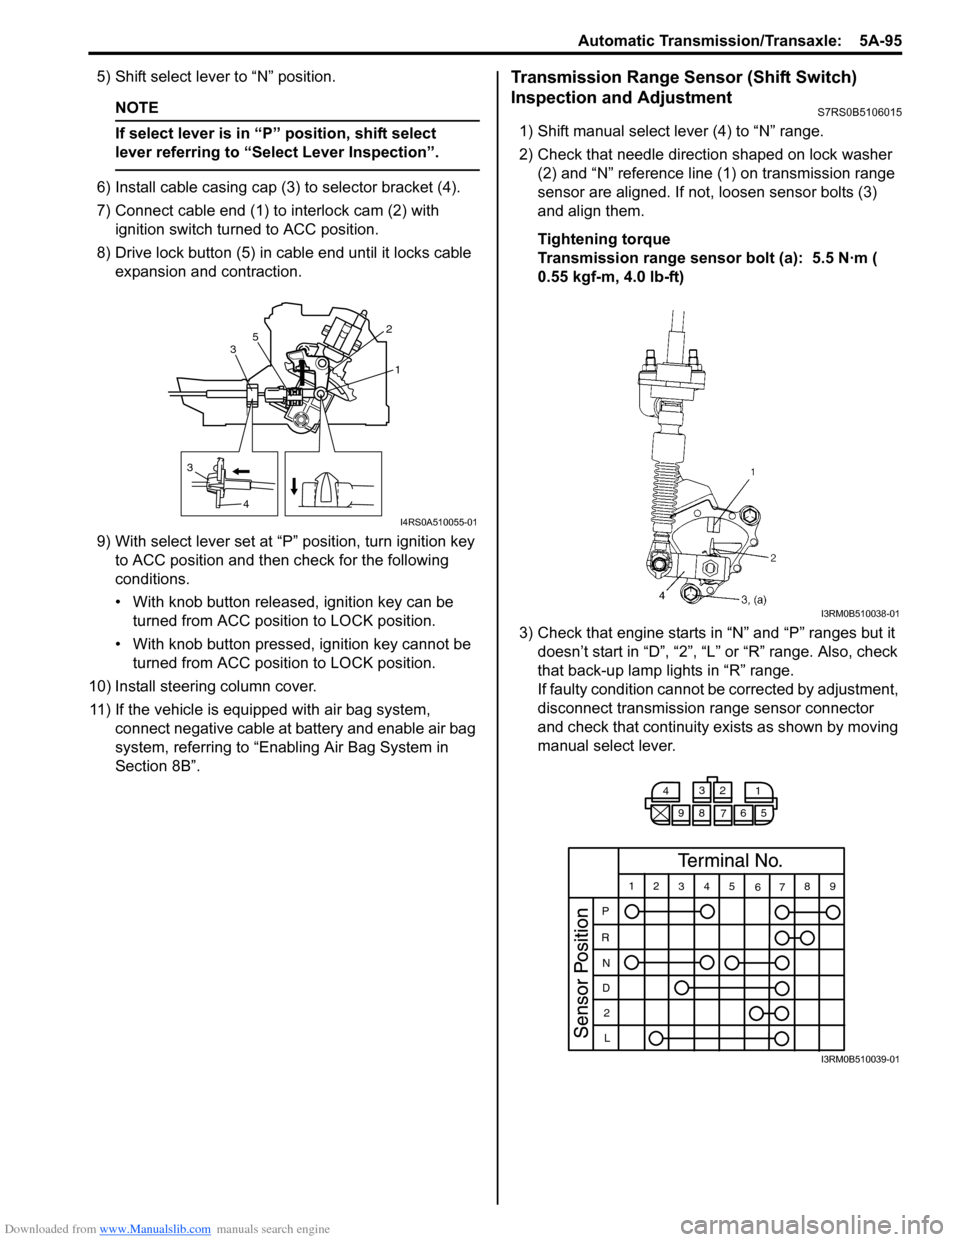 SUZUKI SWIFT 2006 2.G Service Owners Guide Downloaded from www.Manualslib.com manuals search engine Automatic Transmission/Transaxle:  5A-95
5) Shift select lever to “N” position.
NOTE
If select lever is in “P” position, shift select 
